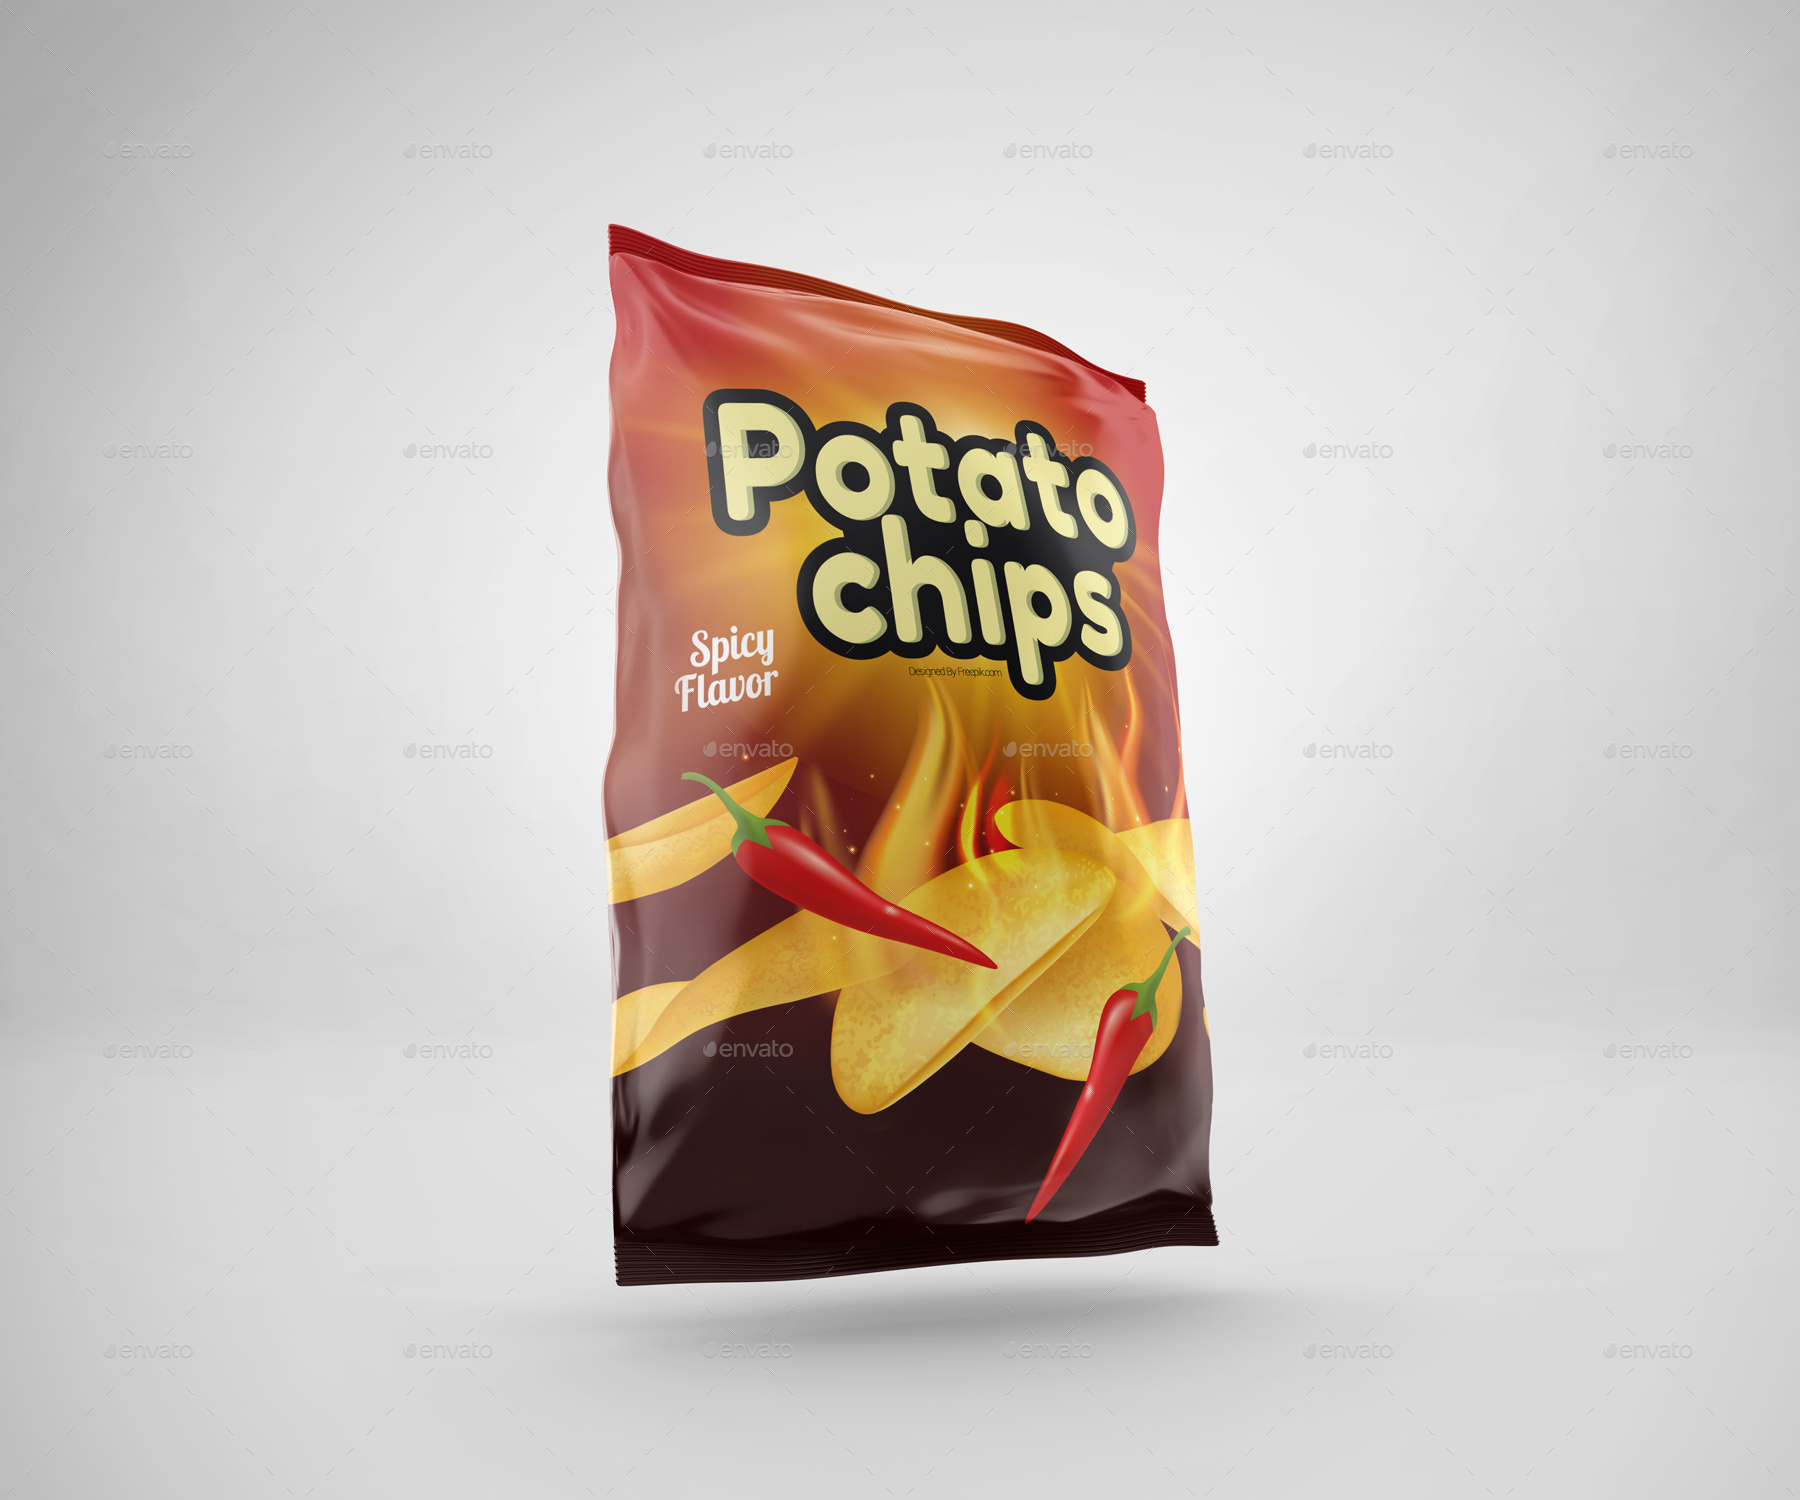 Download Snack Bag Mockup by Pixelica21 | GraphicRiver